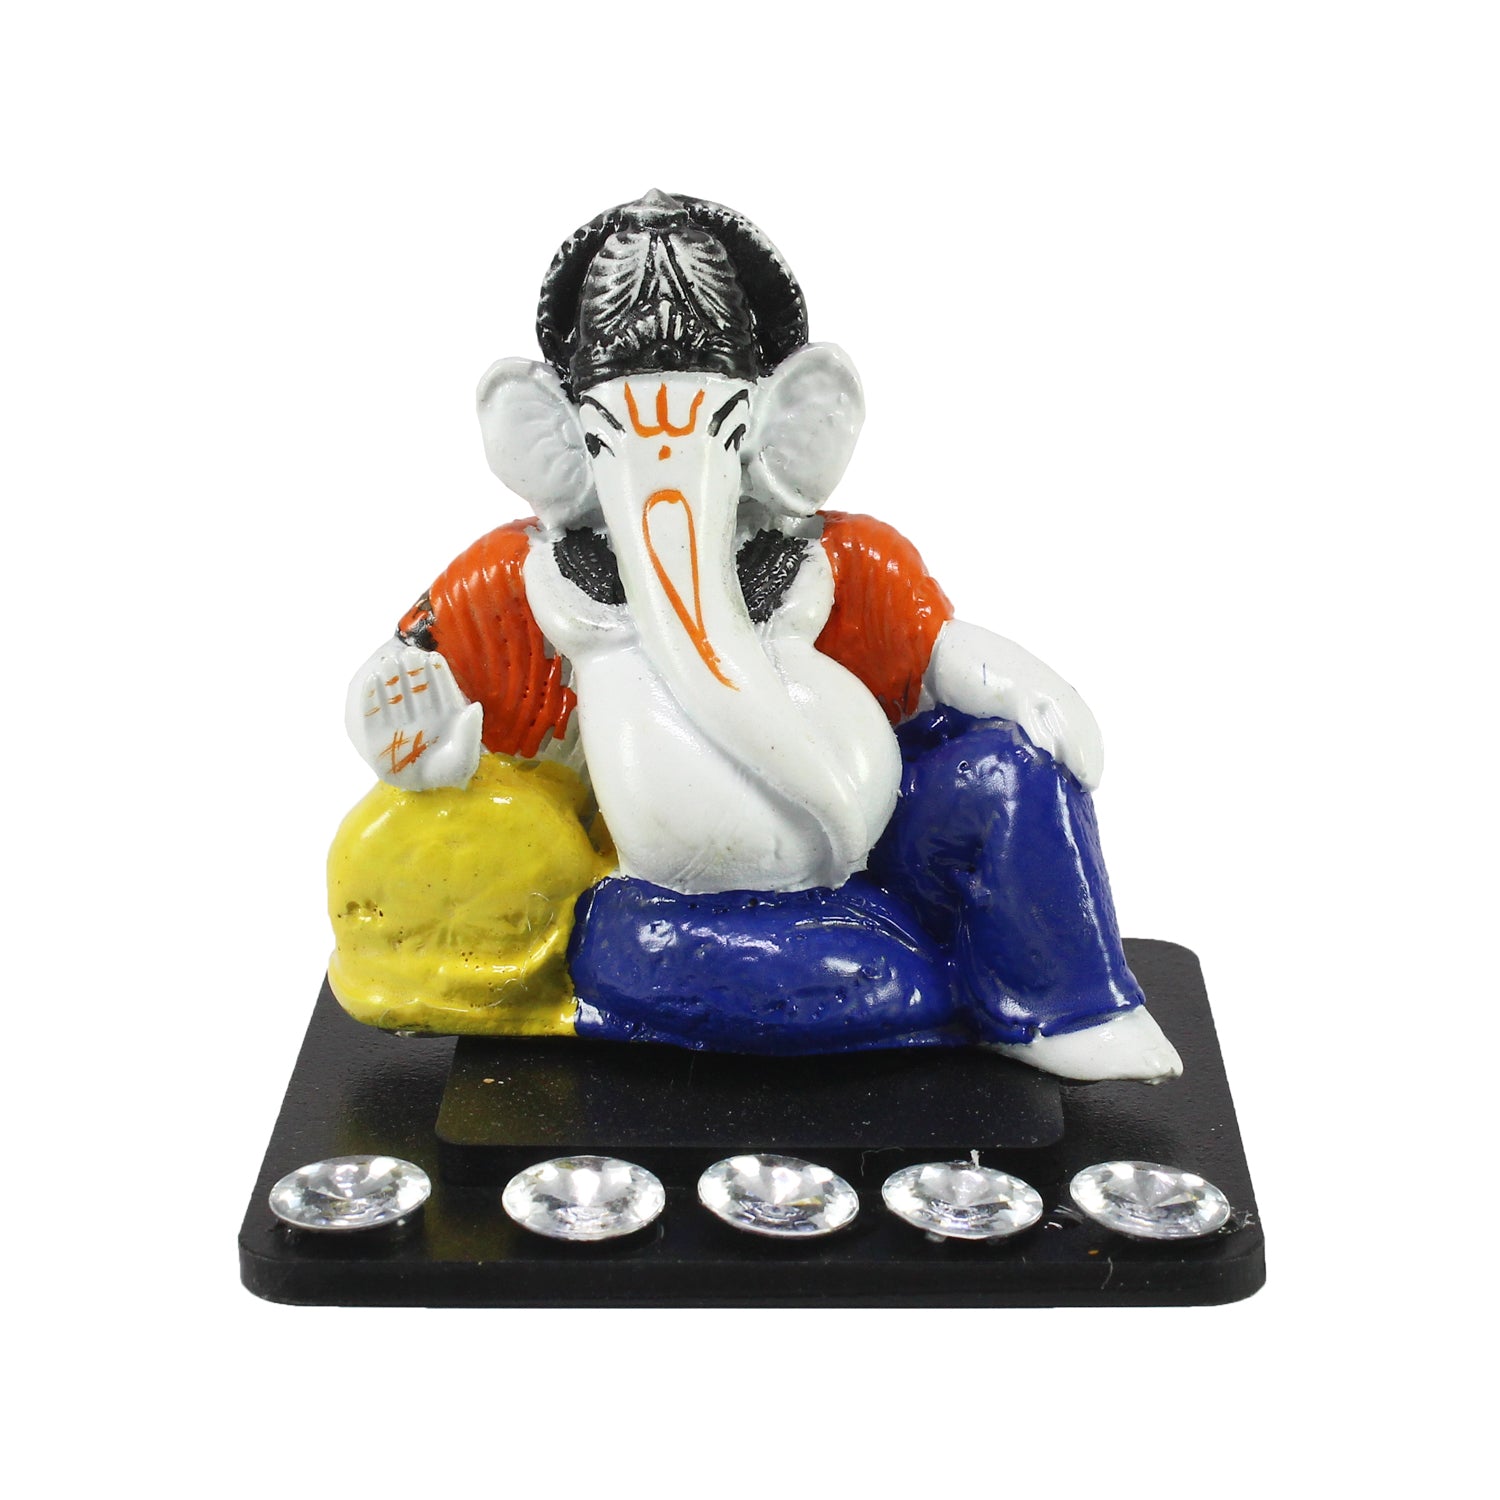 Decorative Lord Ganesha Idol For Car Dashboard, Home Temple, And Office Desks 1